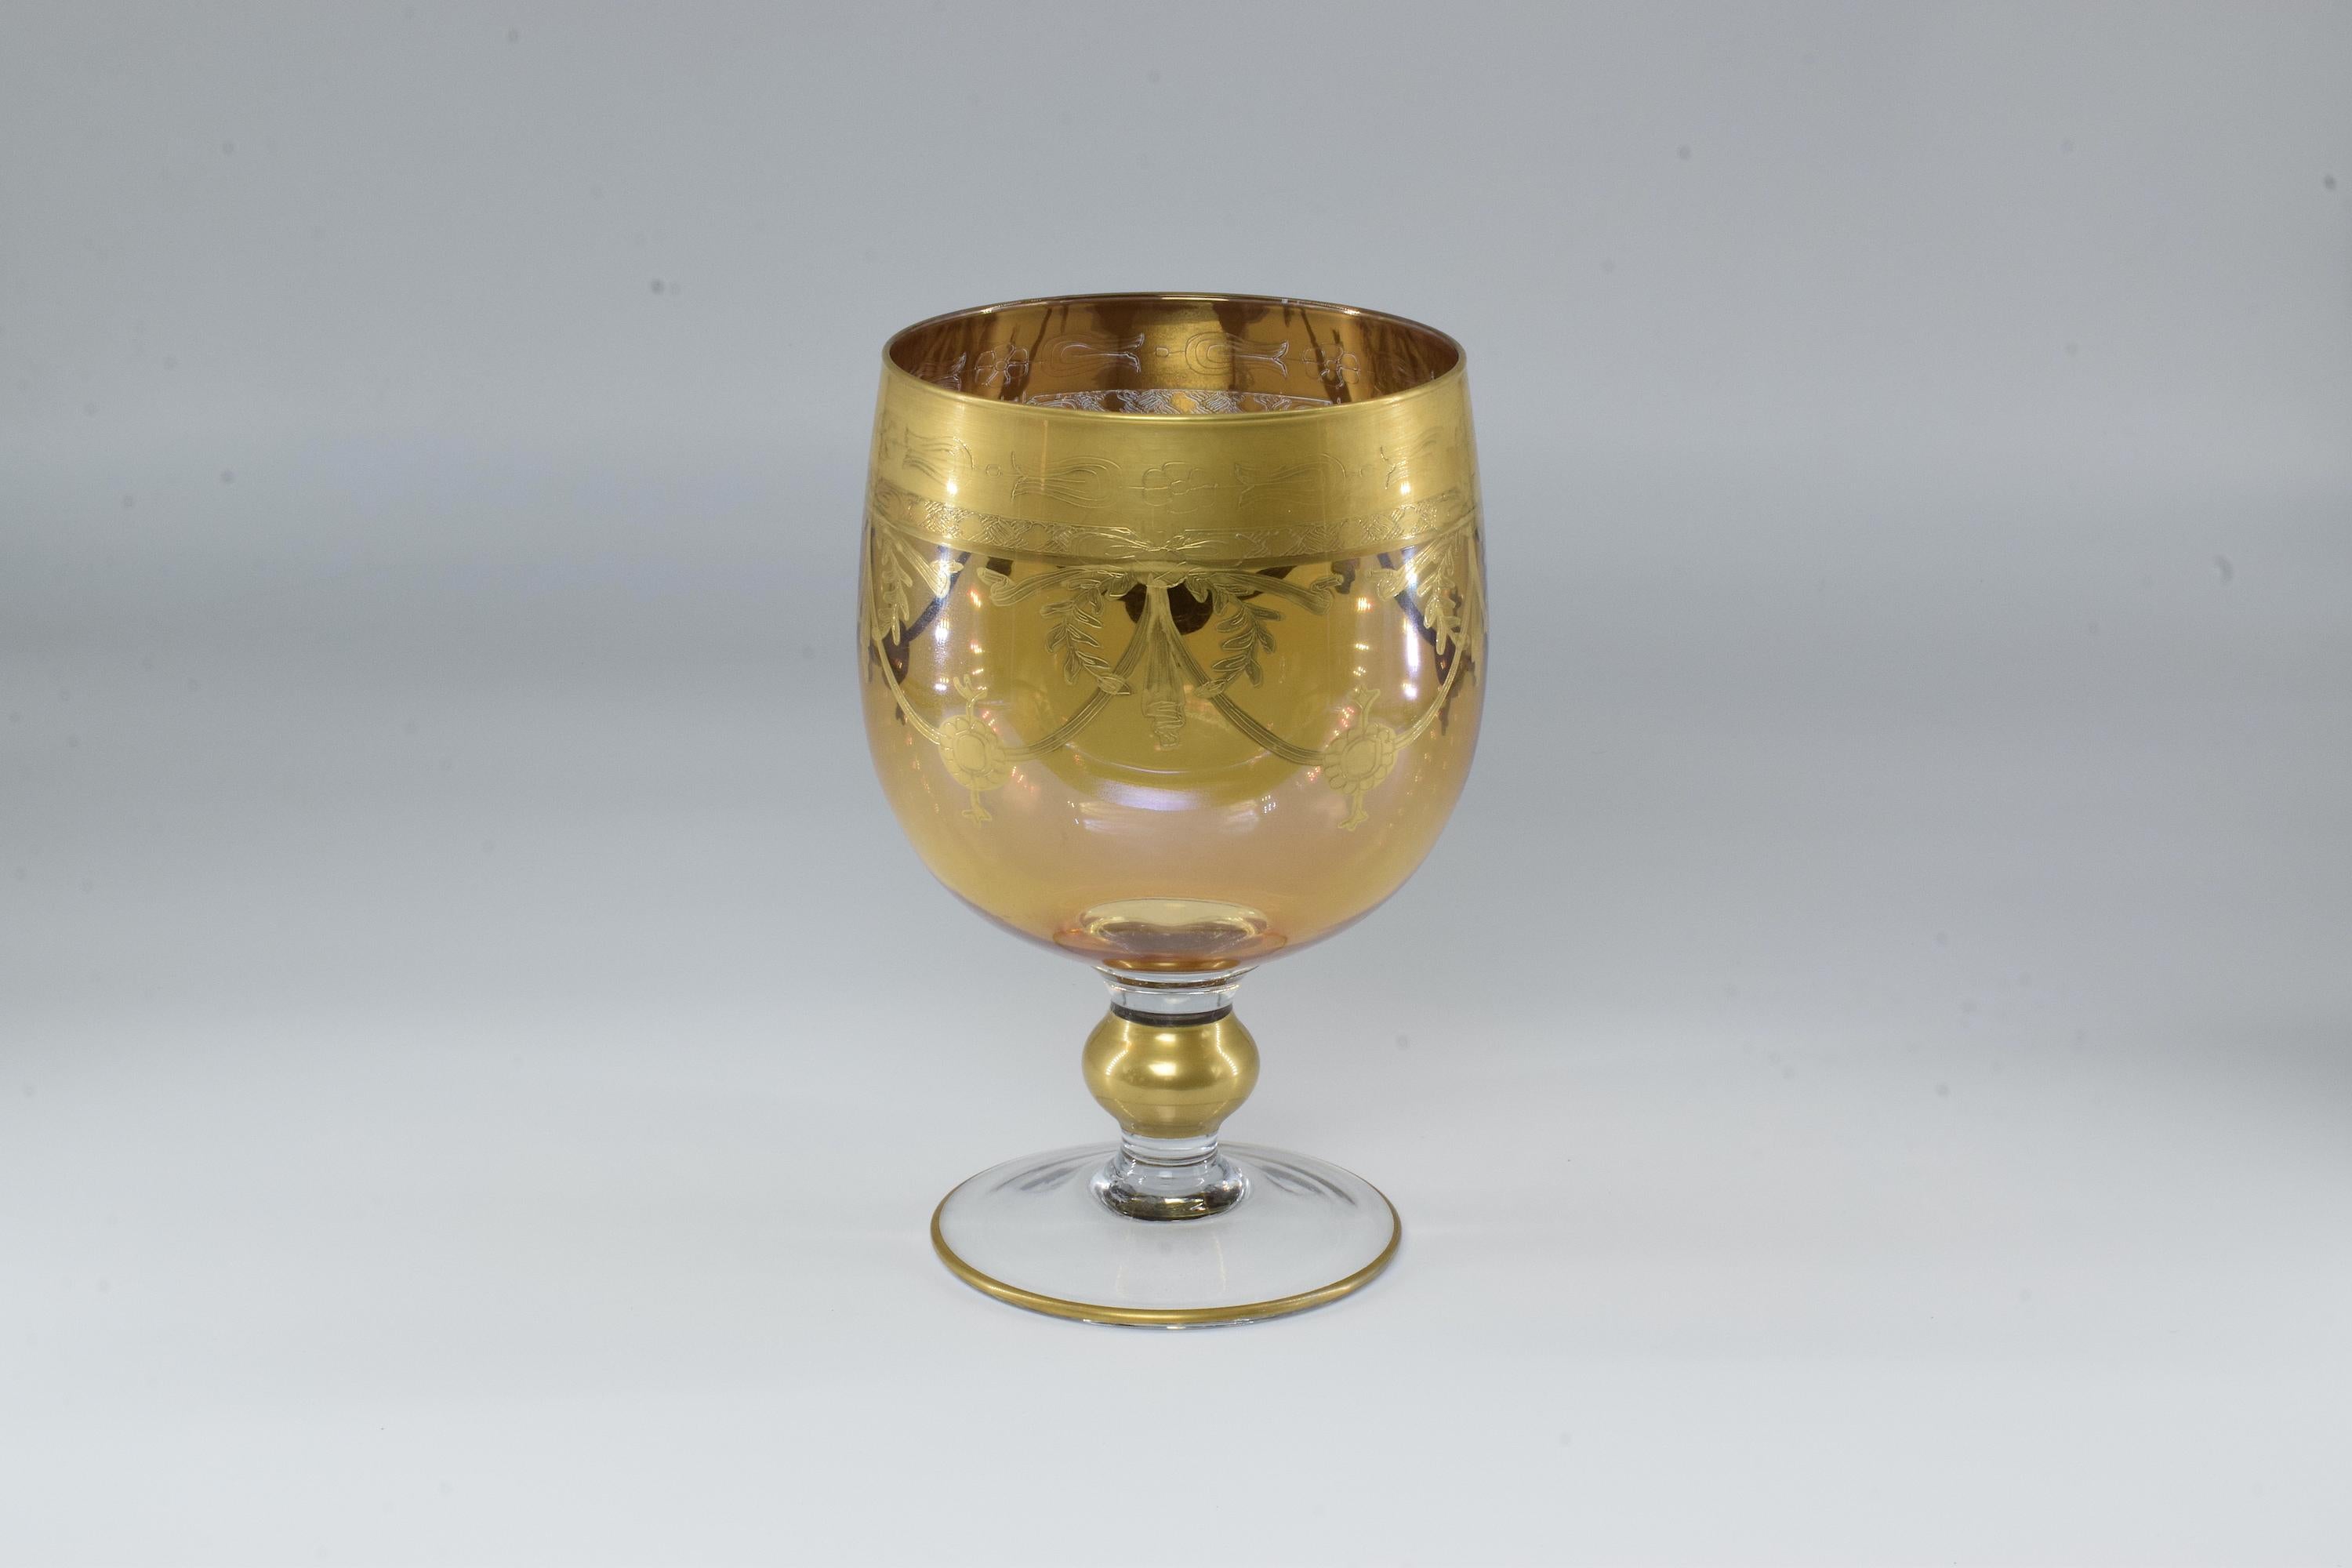 A 20th century vintage decorative crystal cup designed with hand painted gold plated ornamental patterns,
Italy, circa 1950s. 
A standout decorative piece.

We are an exhibition space and an online destination established by the passionate art